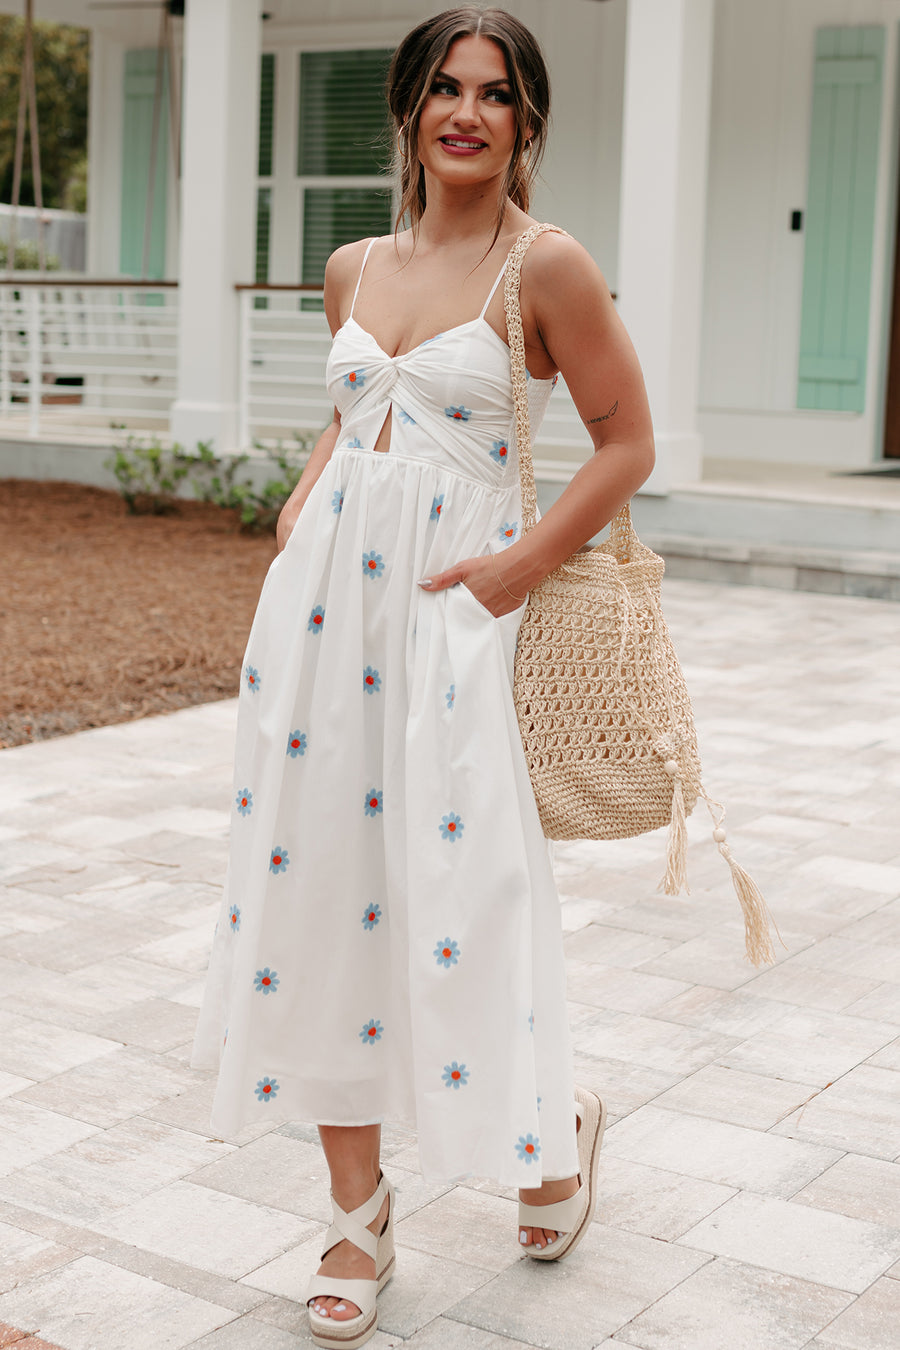 Captivated By You Floral Maxi Dress (Ivory/Blue)